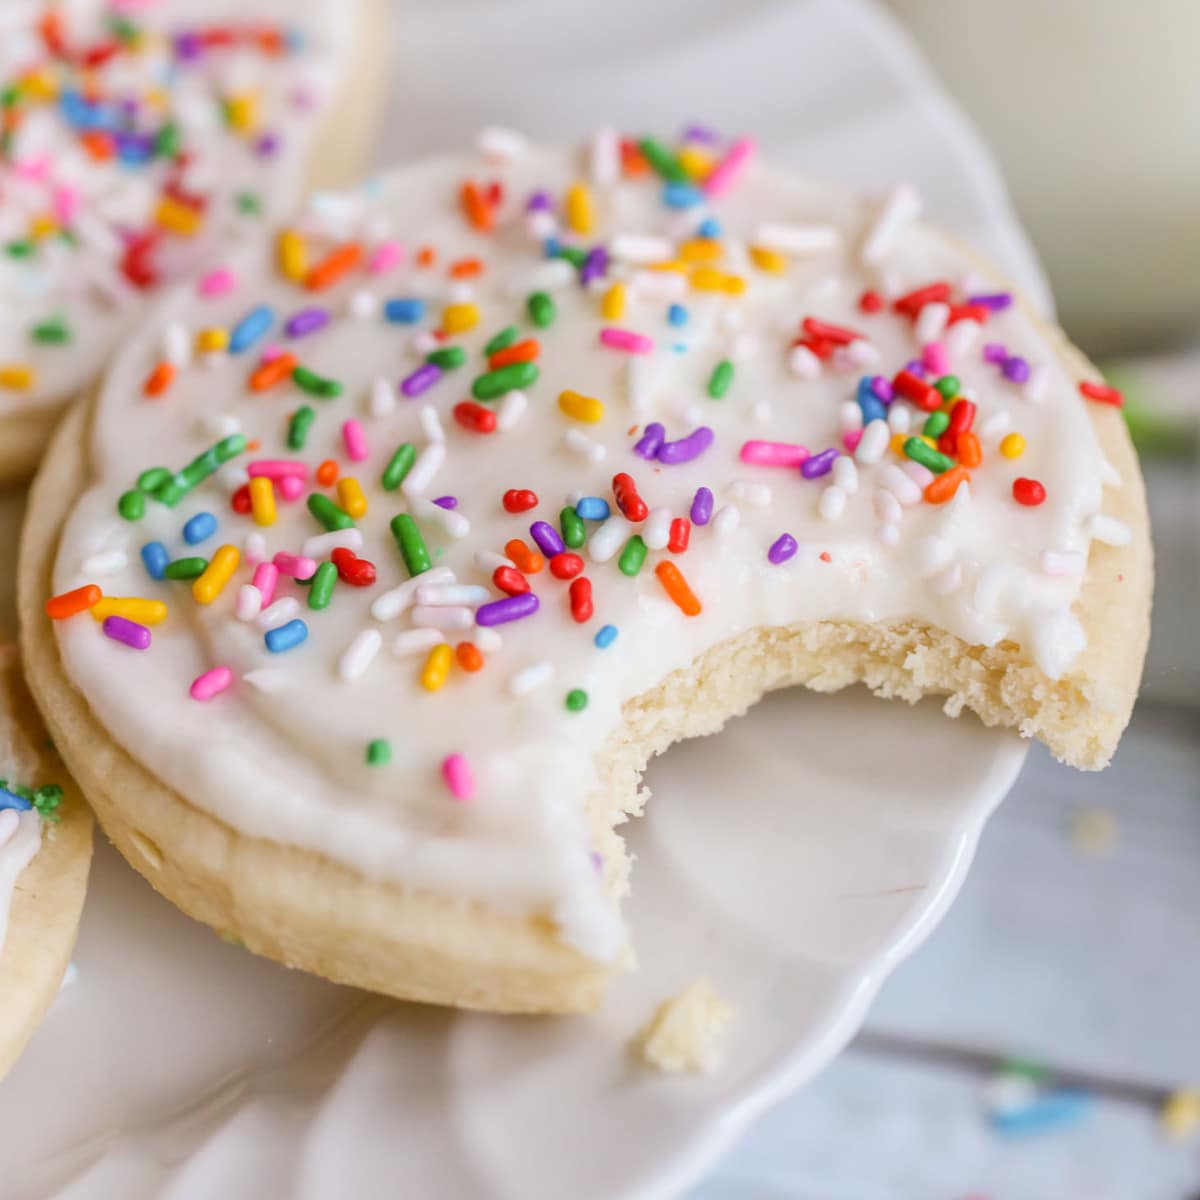 Sugar cookie recipes - best sugar cookies with a bite missing.